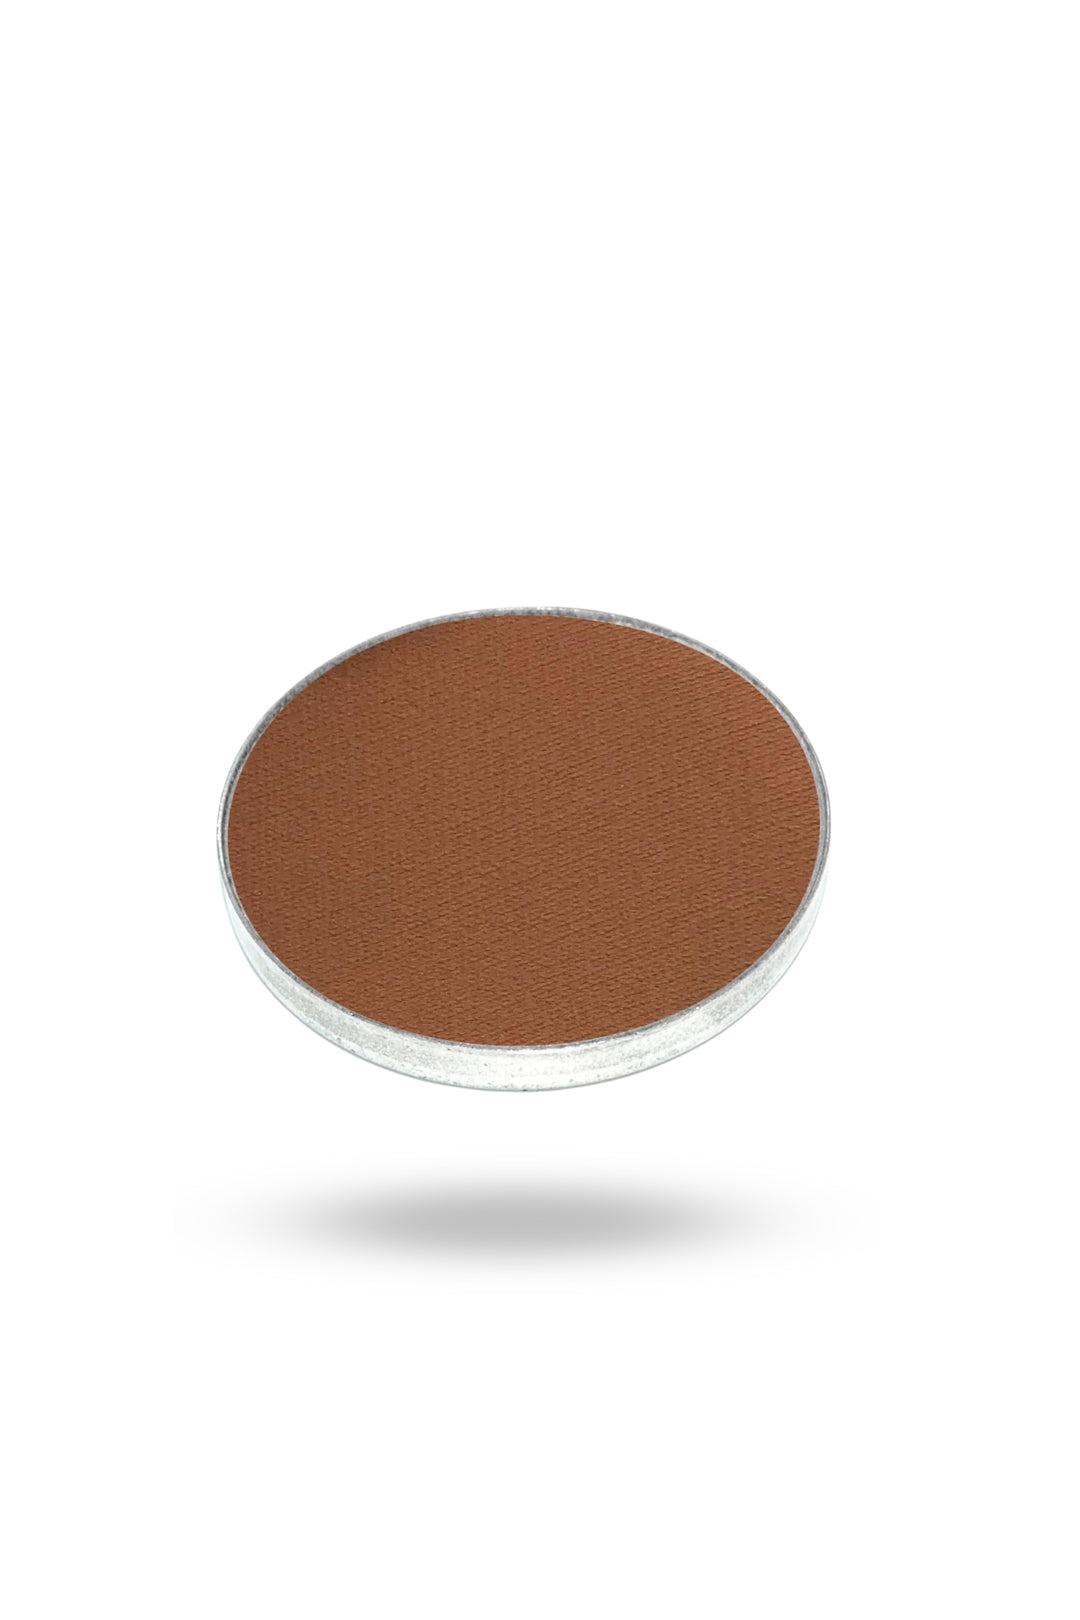 MINERAL PRESSED FACE POWDER | REFILL